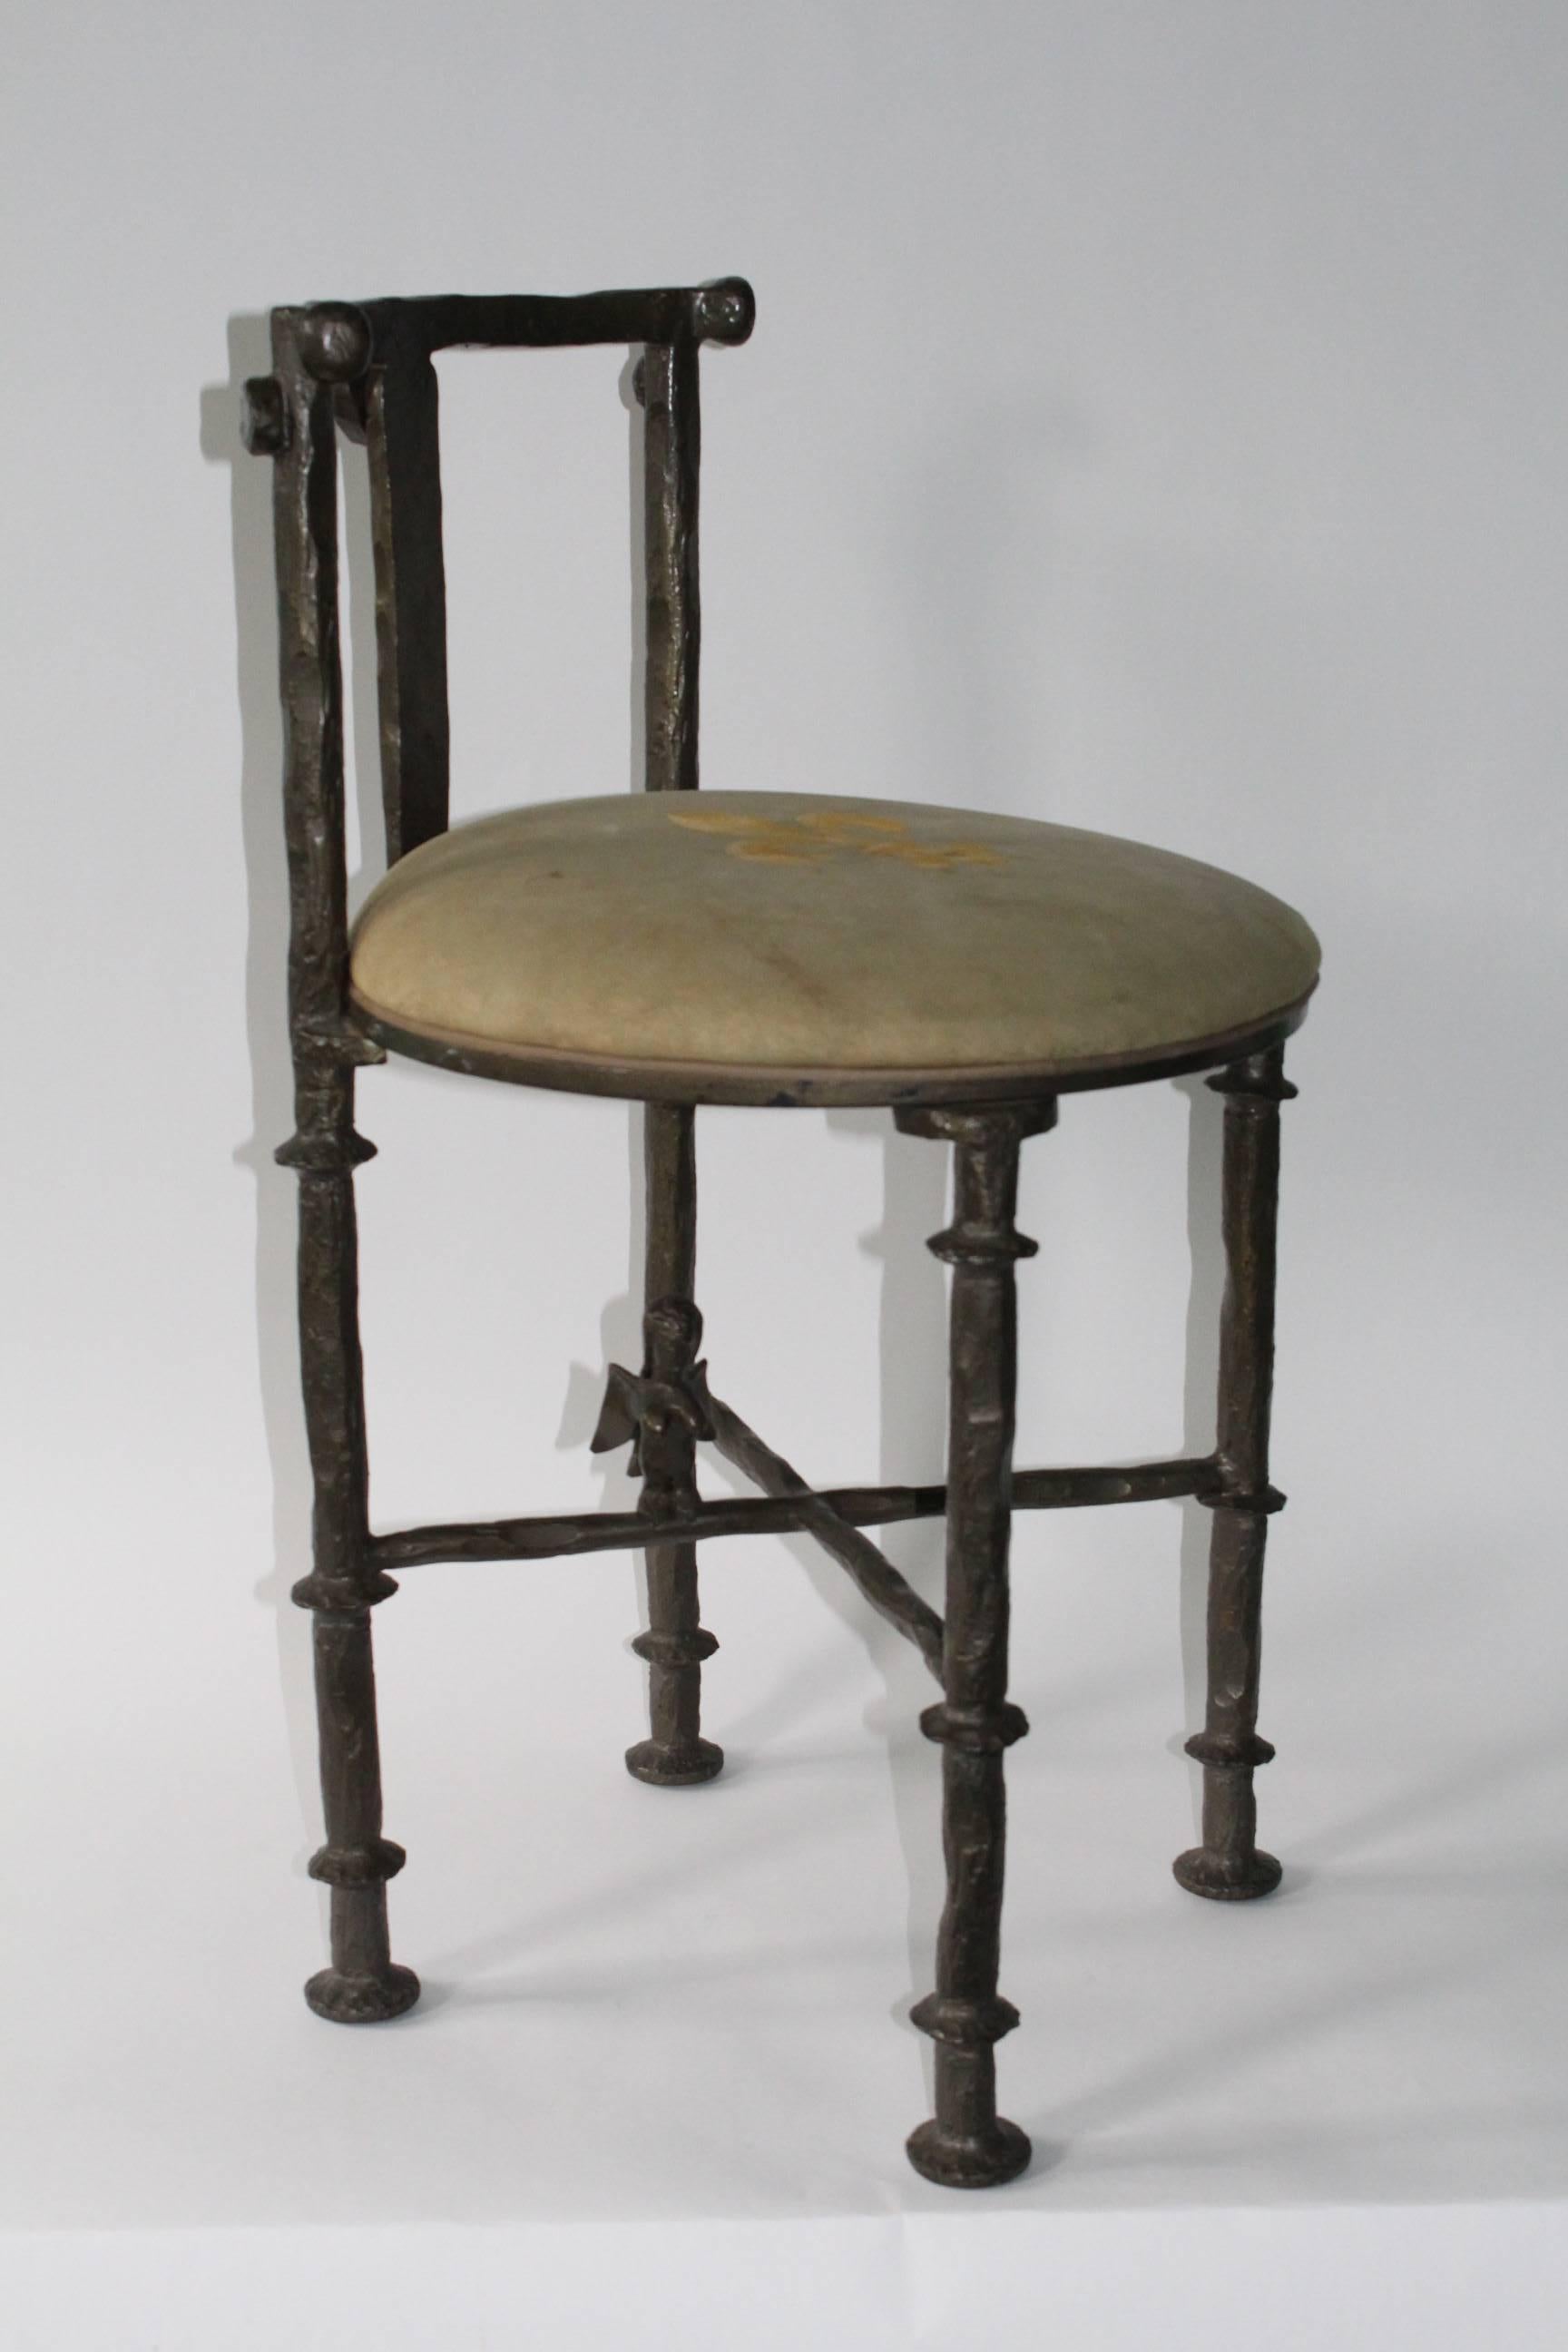 This fantastic stool, designed in the manner of Swiss sculptor Diego Giacometti, includes a Brutalist style frame in hammered and artfully formed patinated steel, the lengthy curved back and cushioned seat with fleur-de-lis on four legs, joined by a